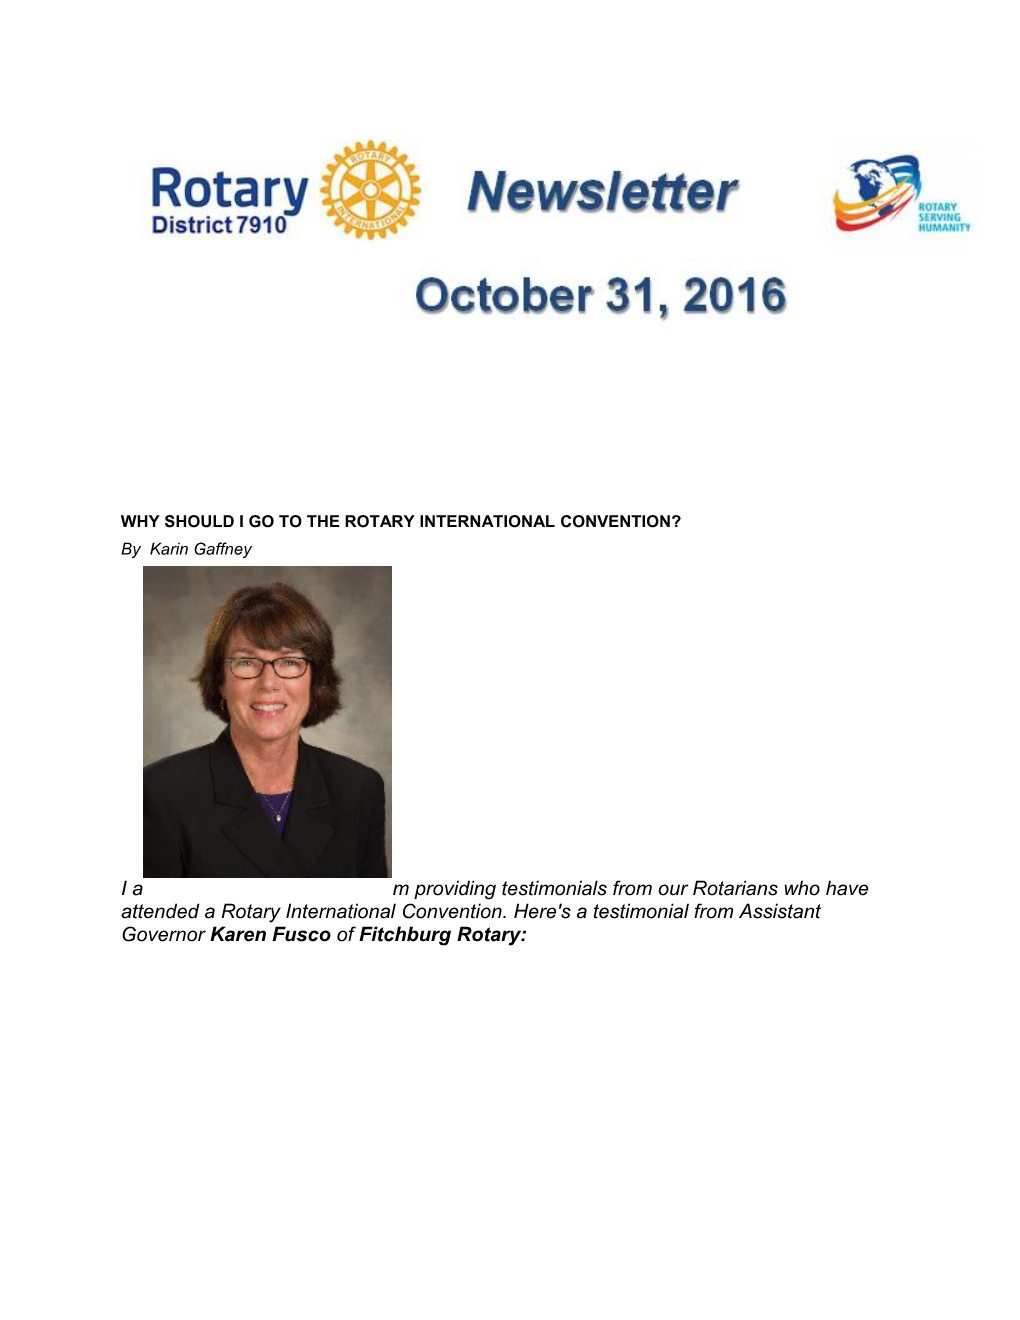 Why Should I Go to the Rotary International Convention?